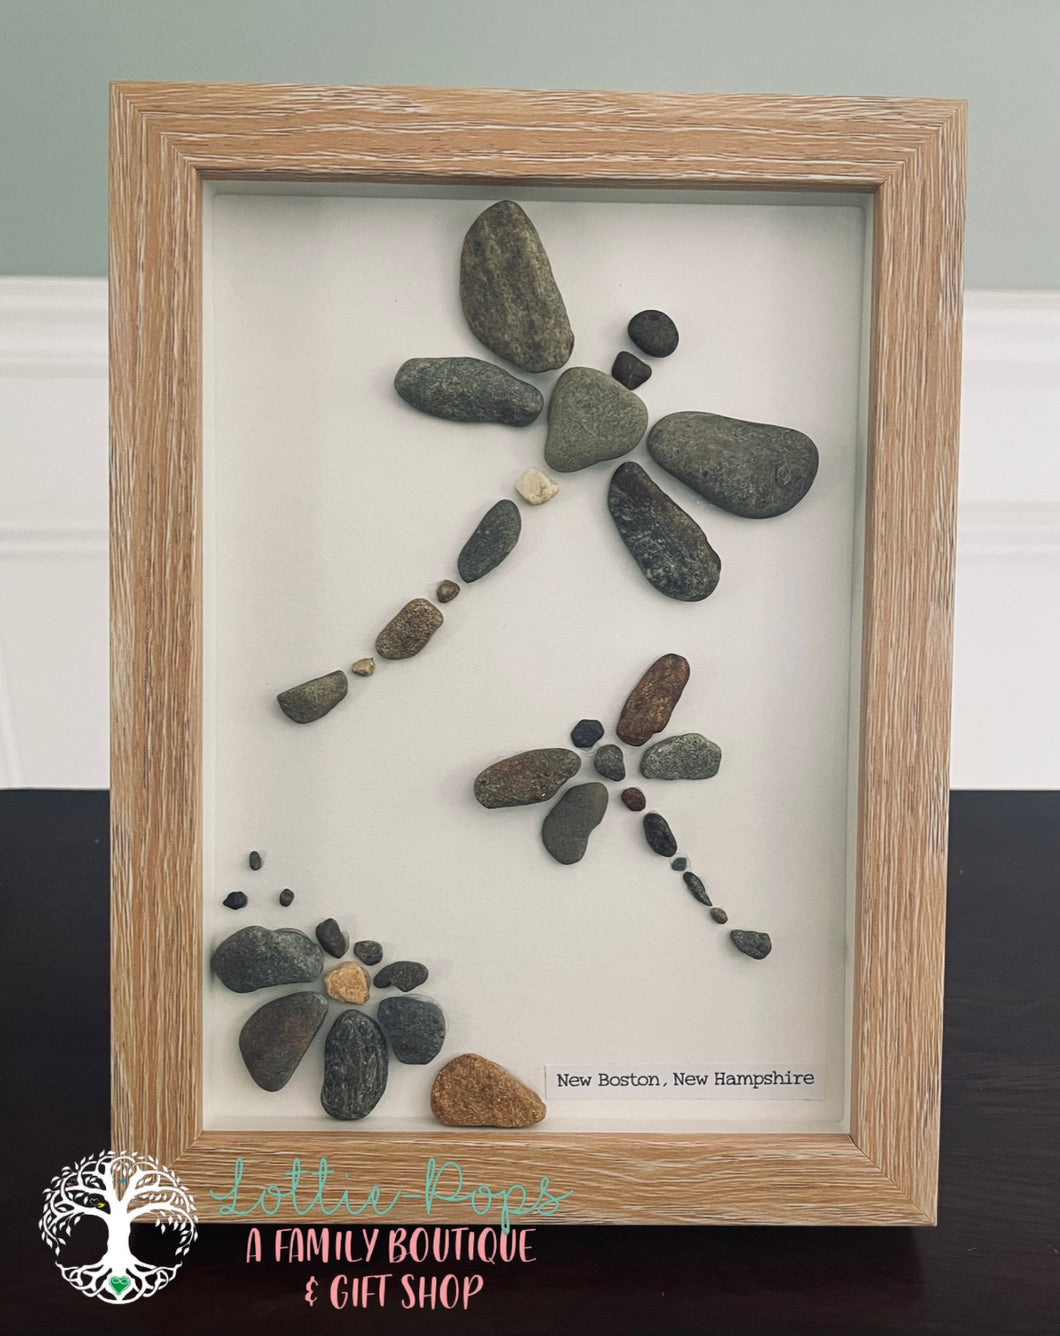 PAIR OF DRAGONFLIES - MOTHER AND SON STONE ART